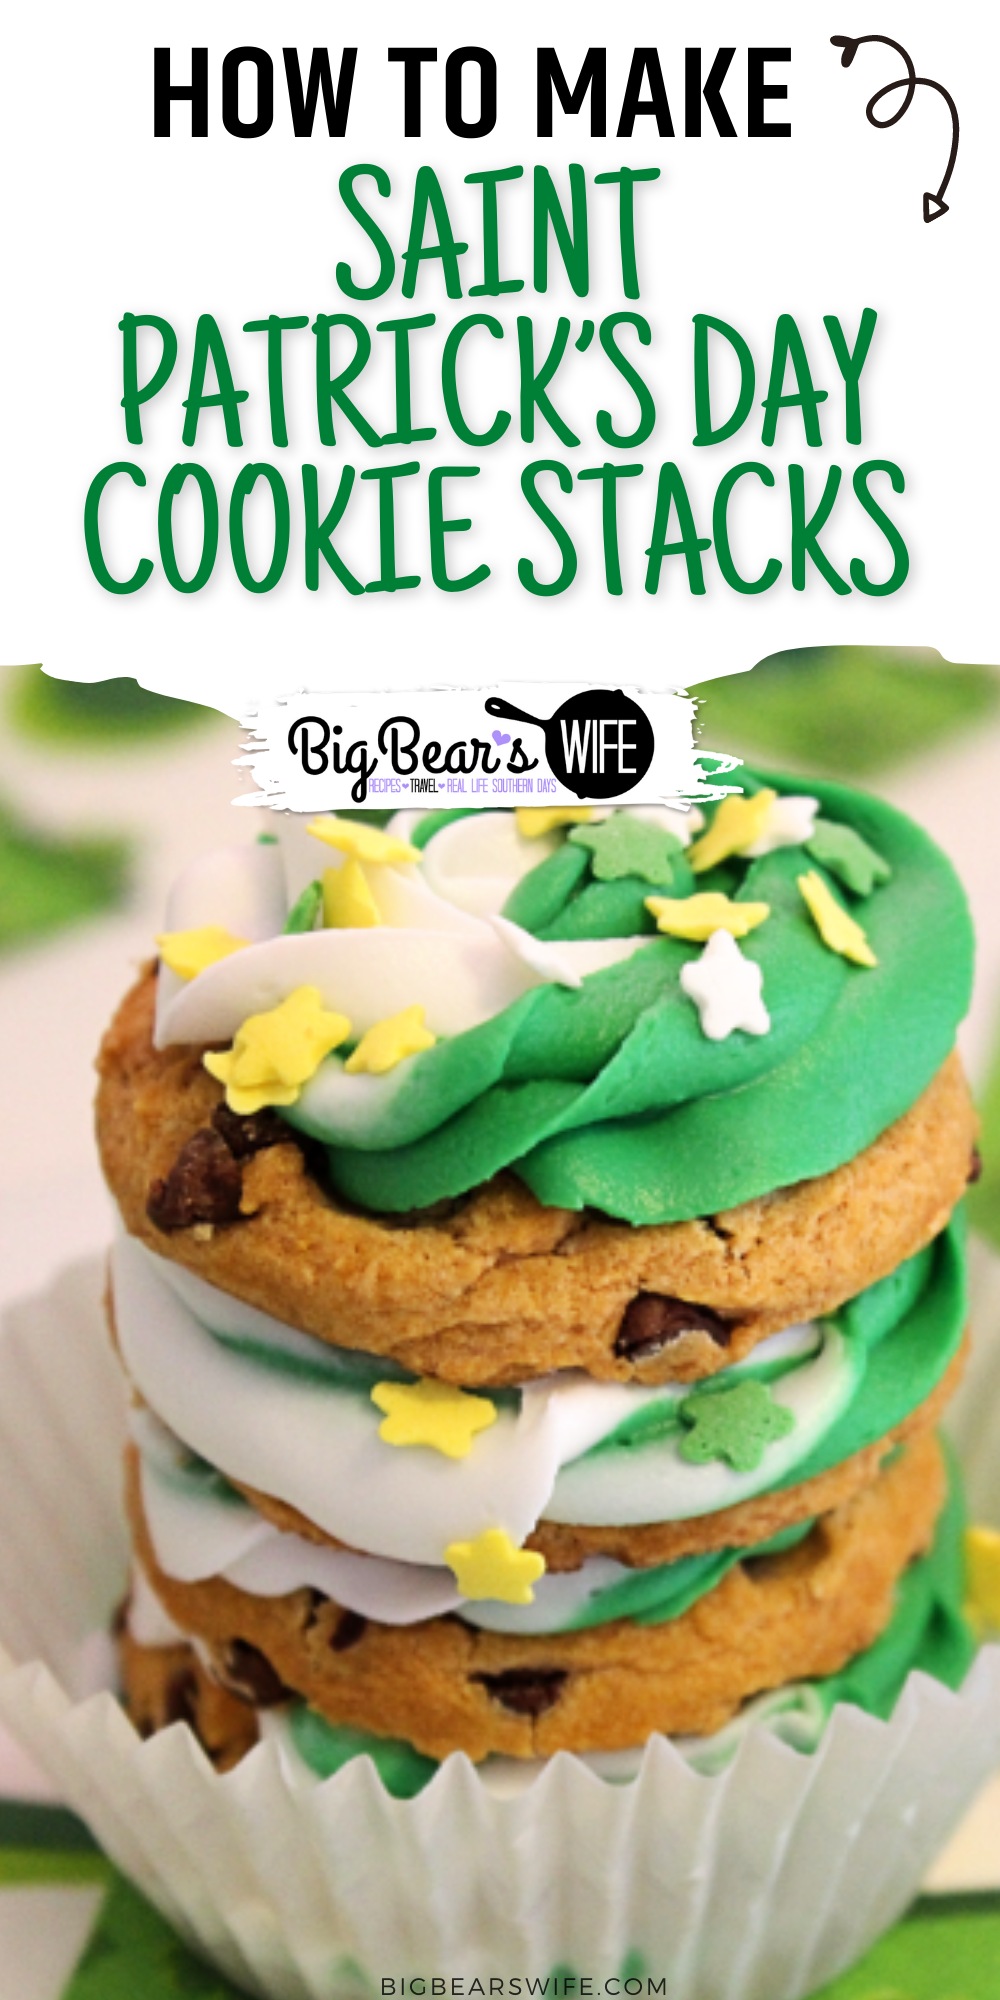 No need to go super crazy with the St. Patricks Day treats! Sometimes, simple is best! These no bake Saint Patrick’s Day Cookie Stacks are easy to decorate and fun to eat! via @bigbearswife